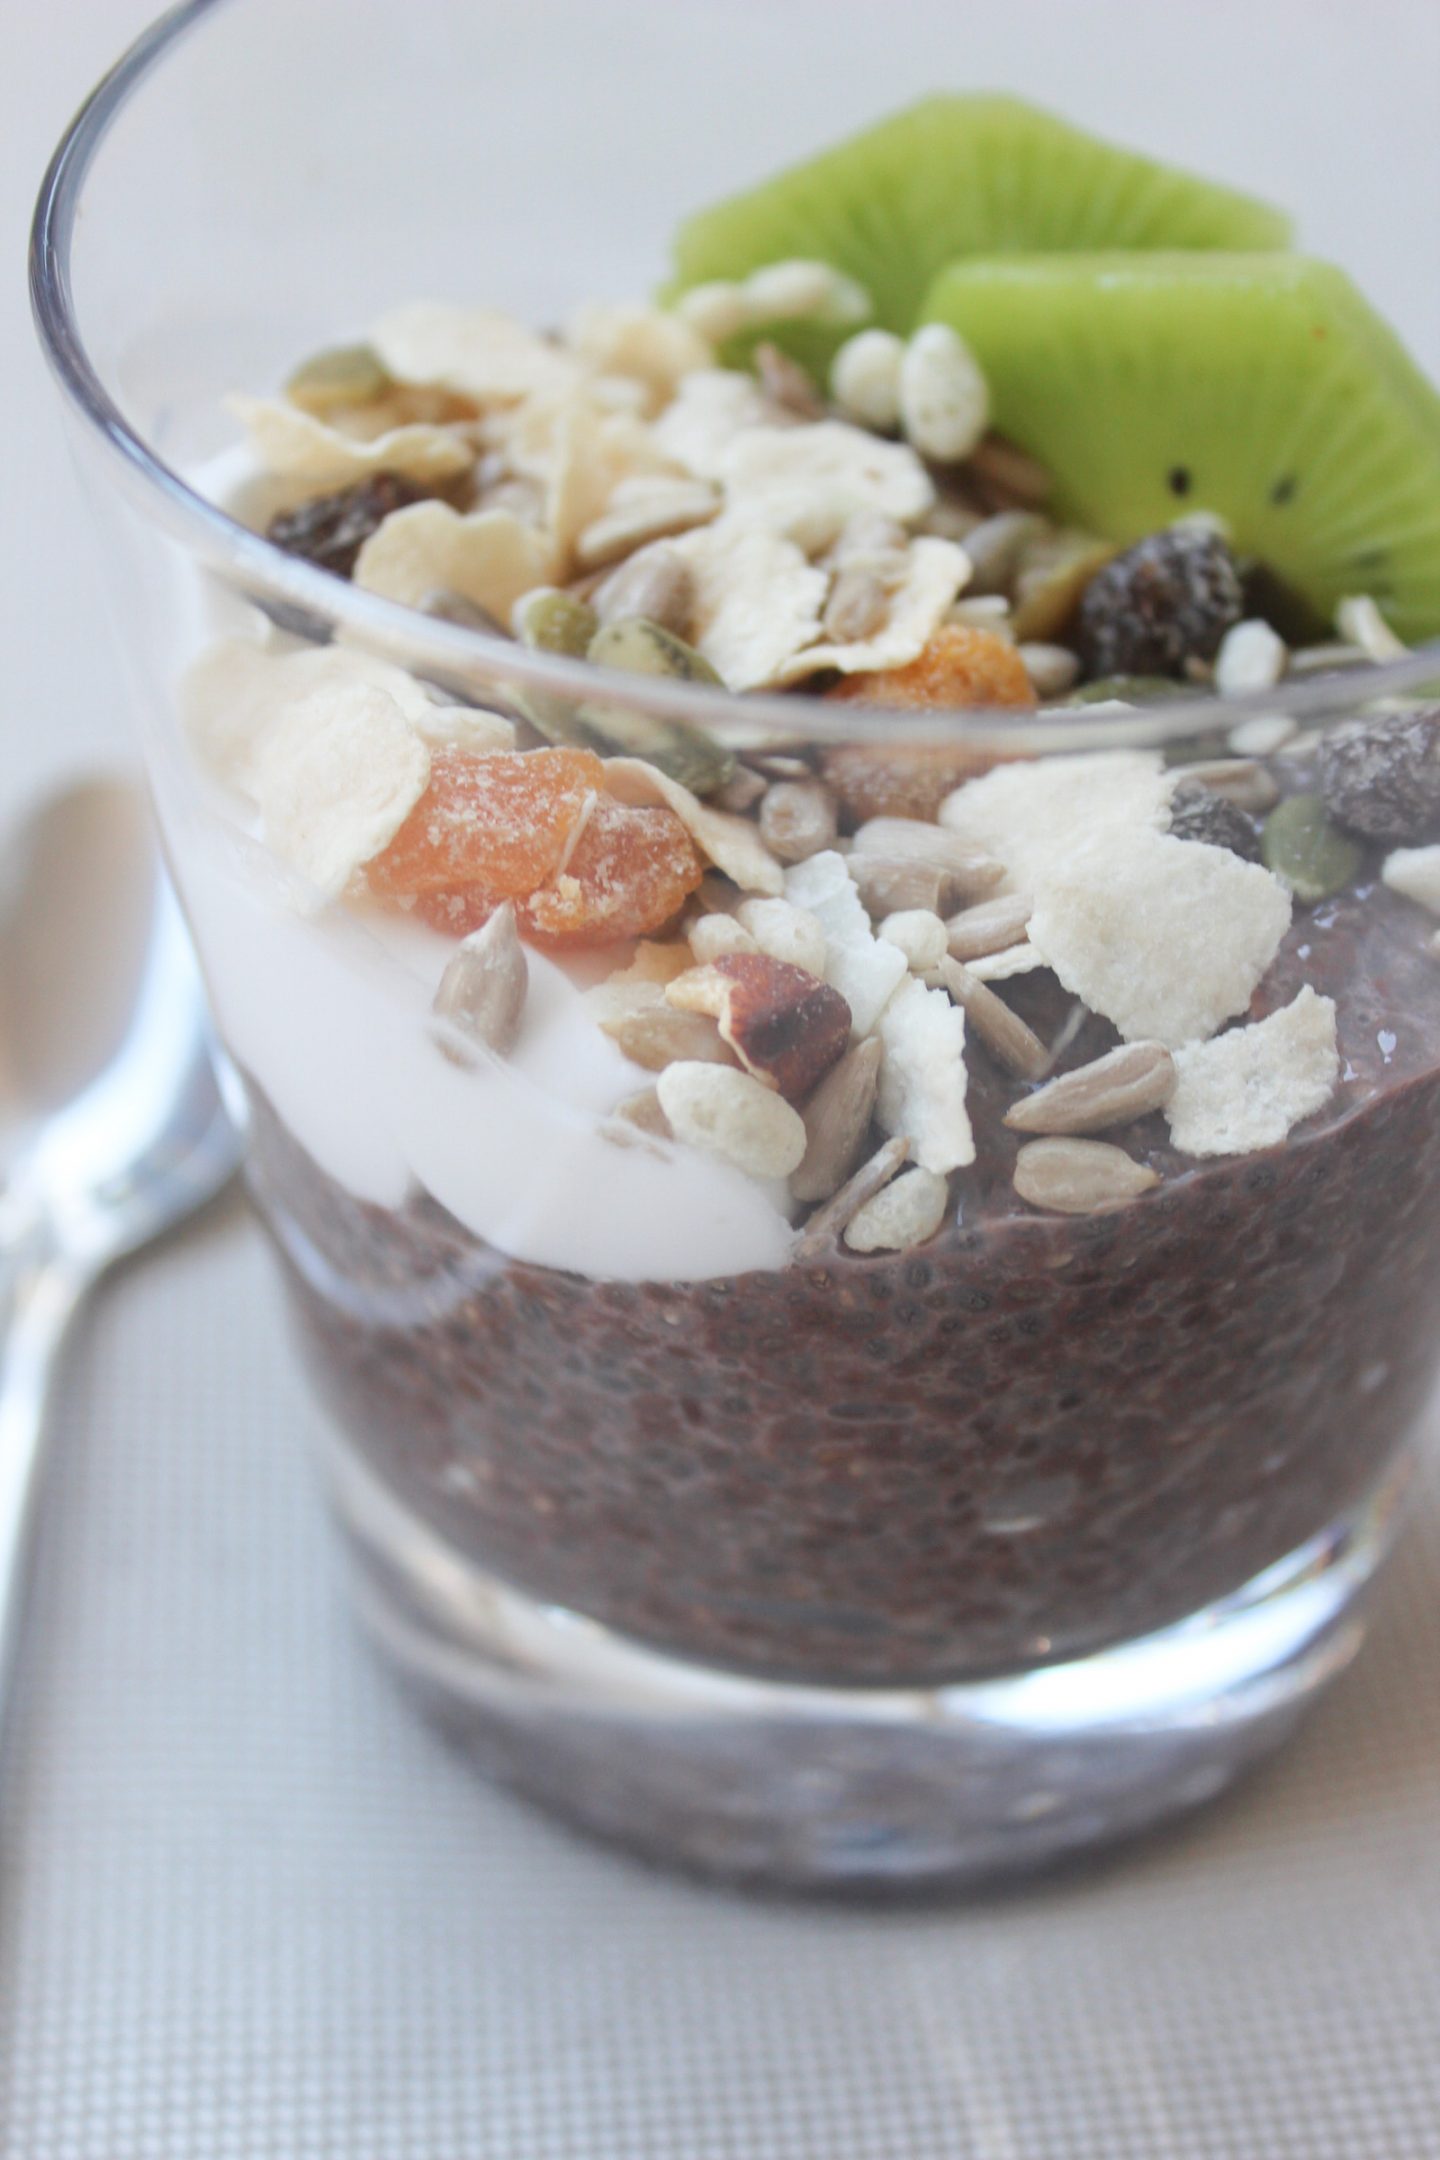 A photo of Chocolate Chia Seed Pudding topped with yoghurt, muesli and kiwi fruit